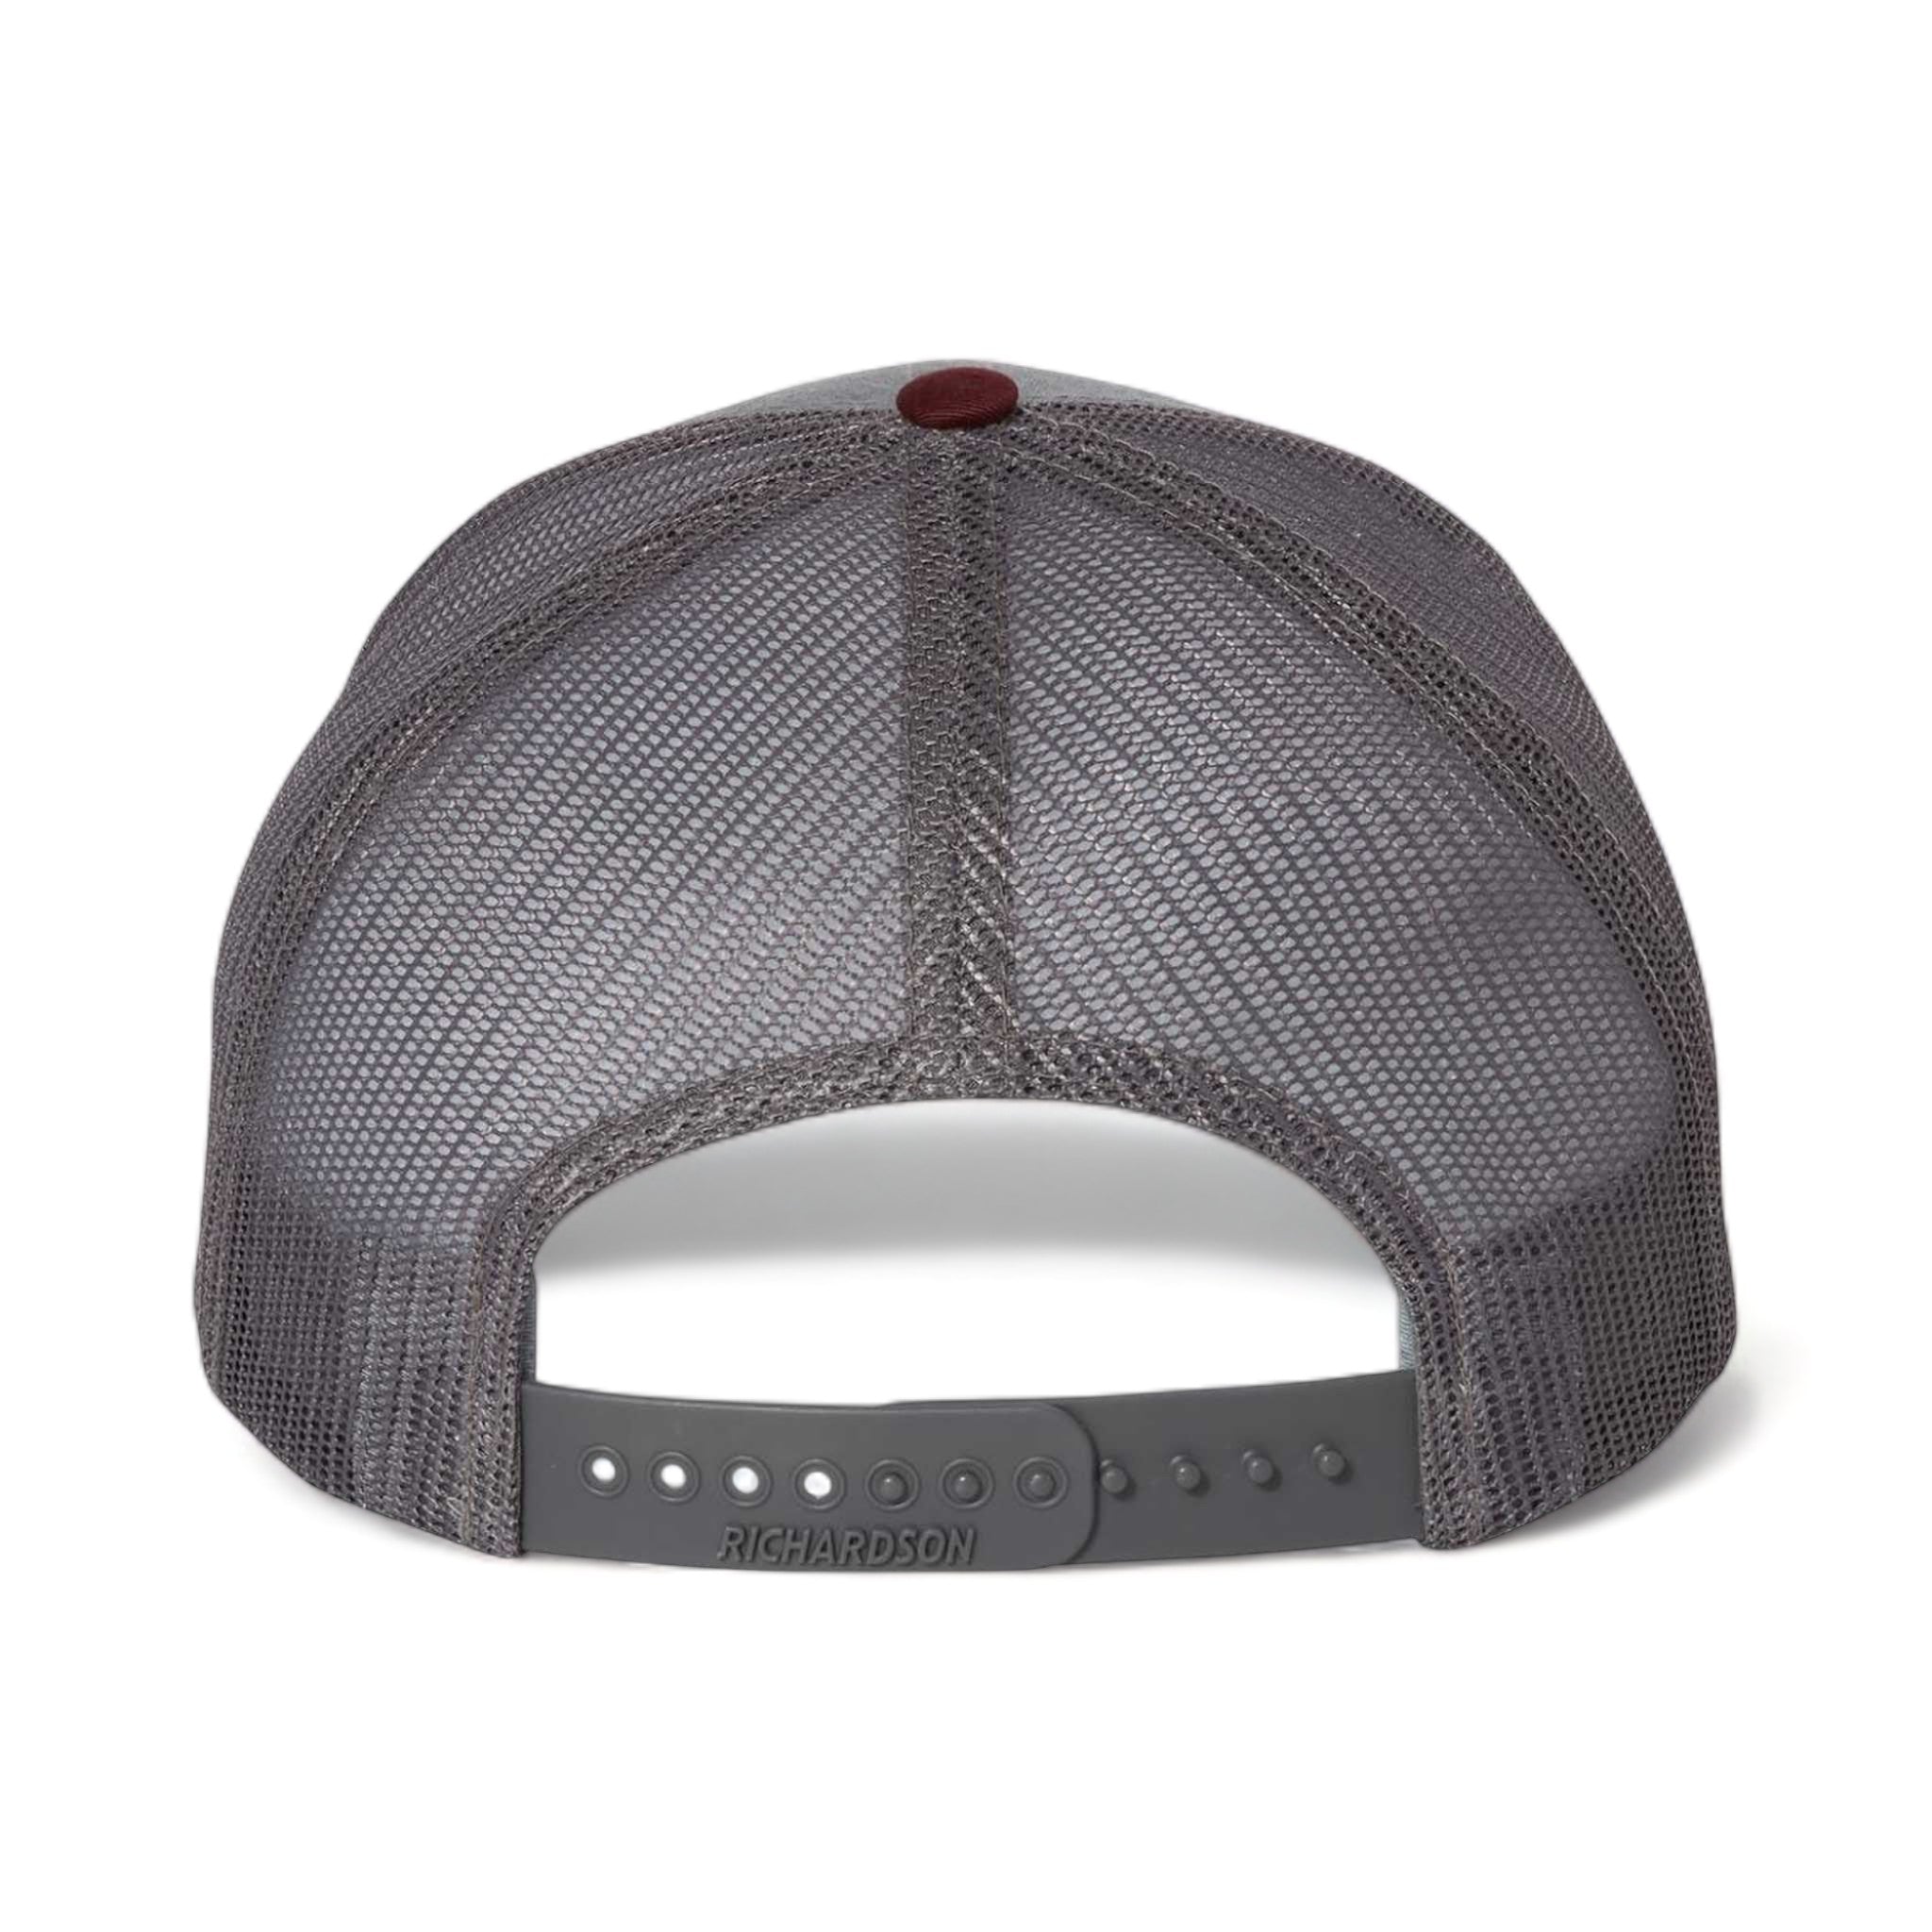 Back view of Richardson 112 custom hat in heather grey, charcoal and maroon